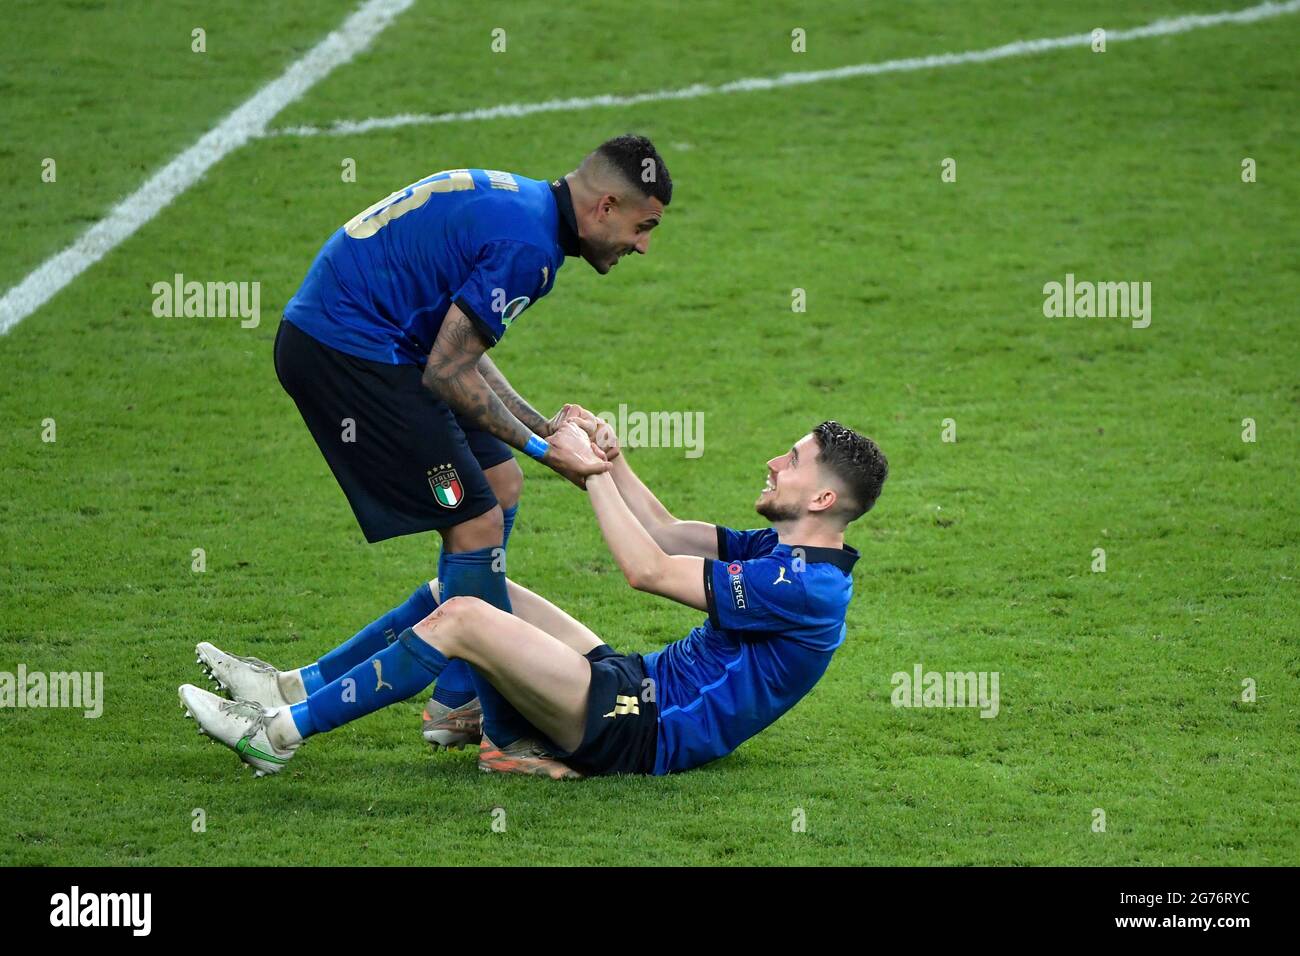 London, UK. 11th July, 2021. Emerson Palmieri Dos Santos of Italy and Jorge Luiz Frello Filho Jorginho of Italy celebrate for victory during the Uefa Euro 2020 Final football match between Italy and England at Wembley stadium in London (England), July 11th, 2021. Photo Andrea Staccioli/Insidefoto Credit: insidefoto srl/Alamy Live News Stock Photo